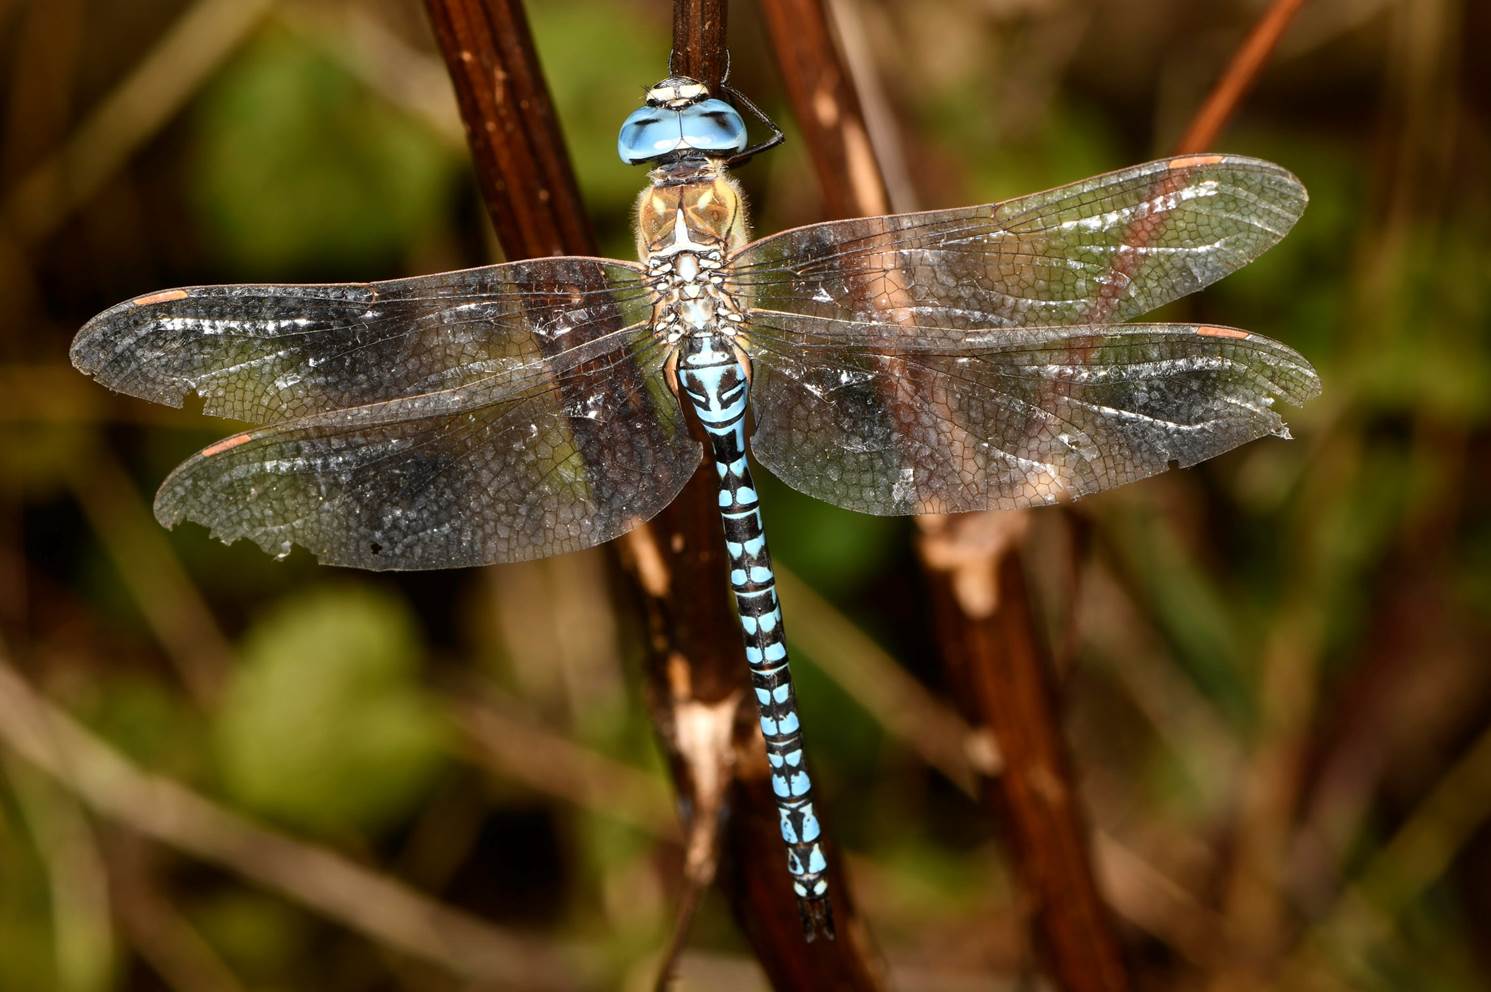 A dragonfly with transparent wings

Description automatically generated